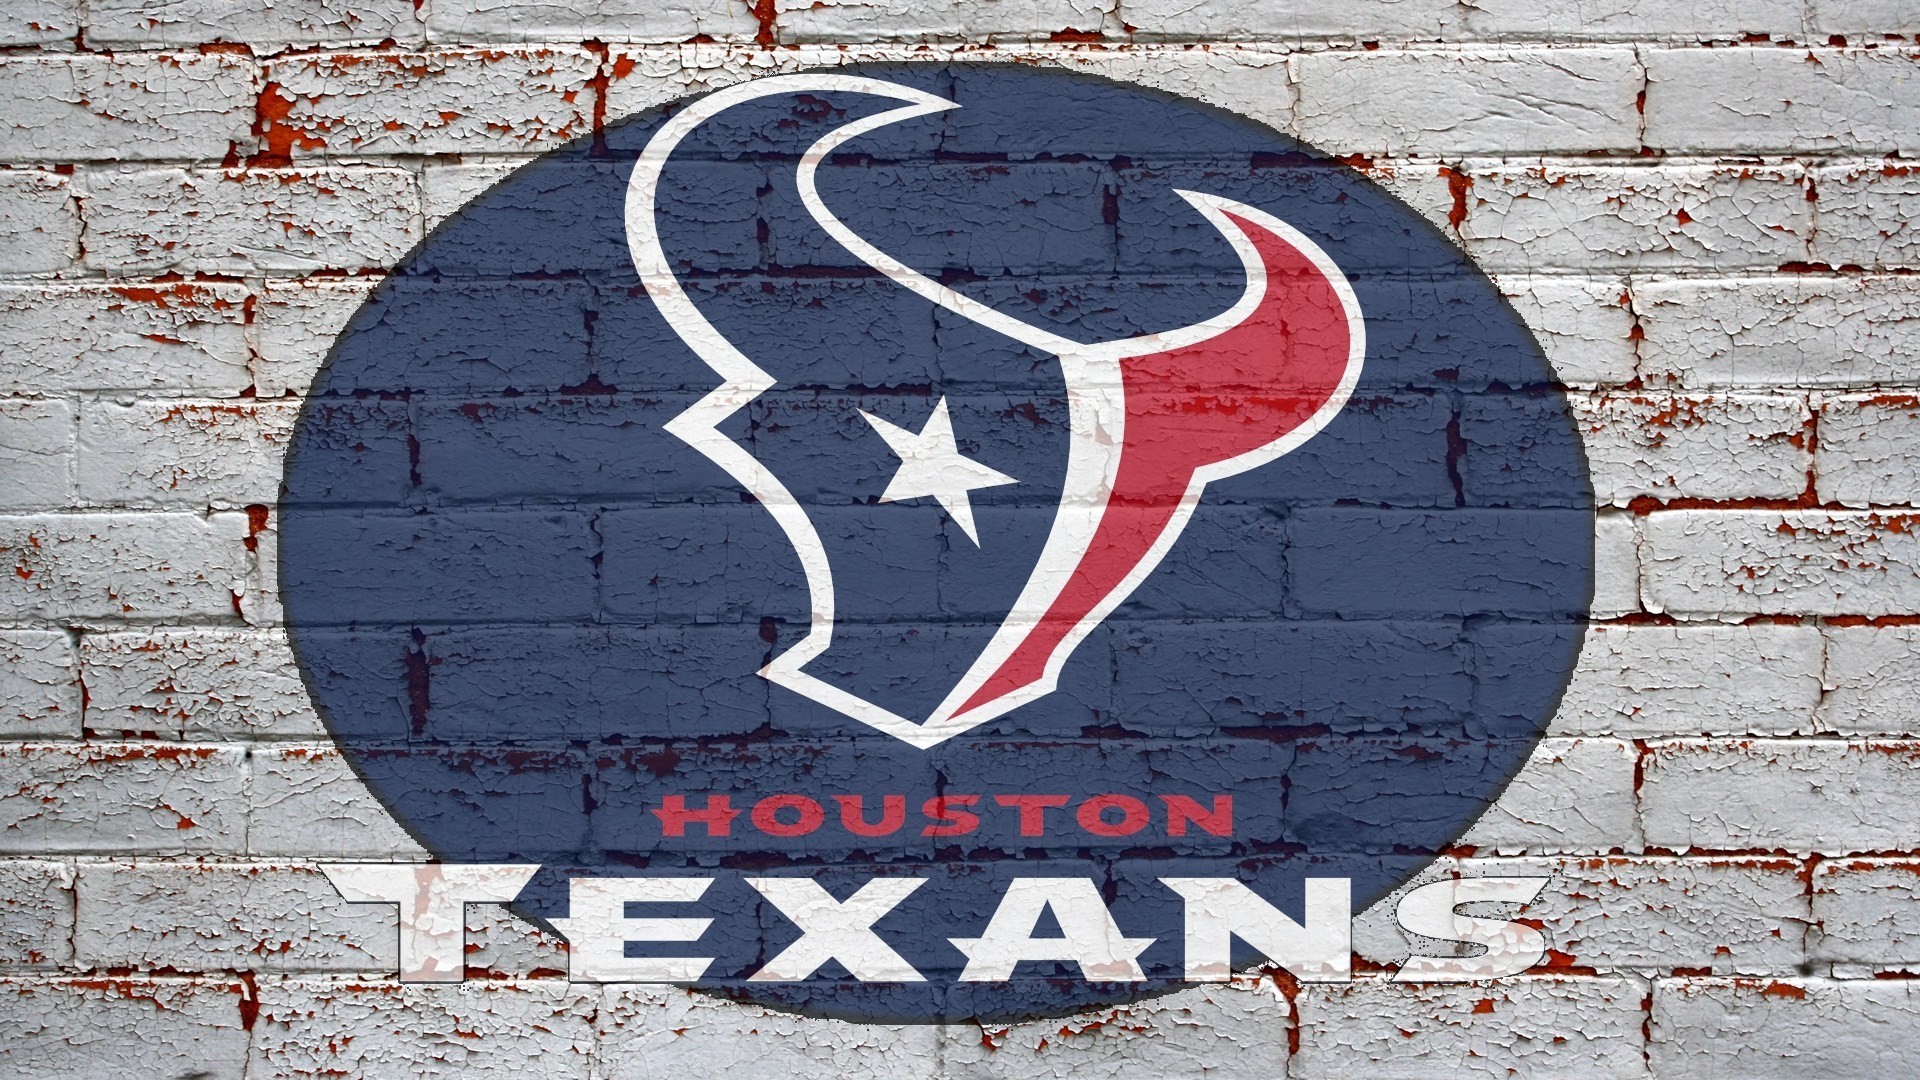 1920 x 1080px houston texans wallpaper pack 1080p hd by Cartwright WilKinson